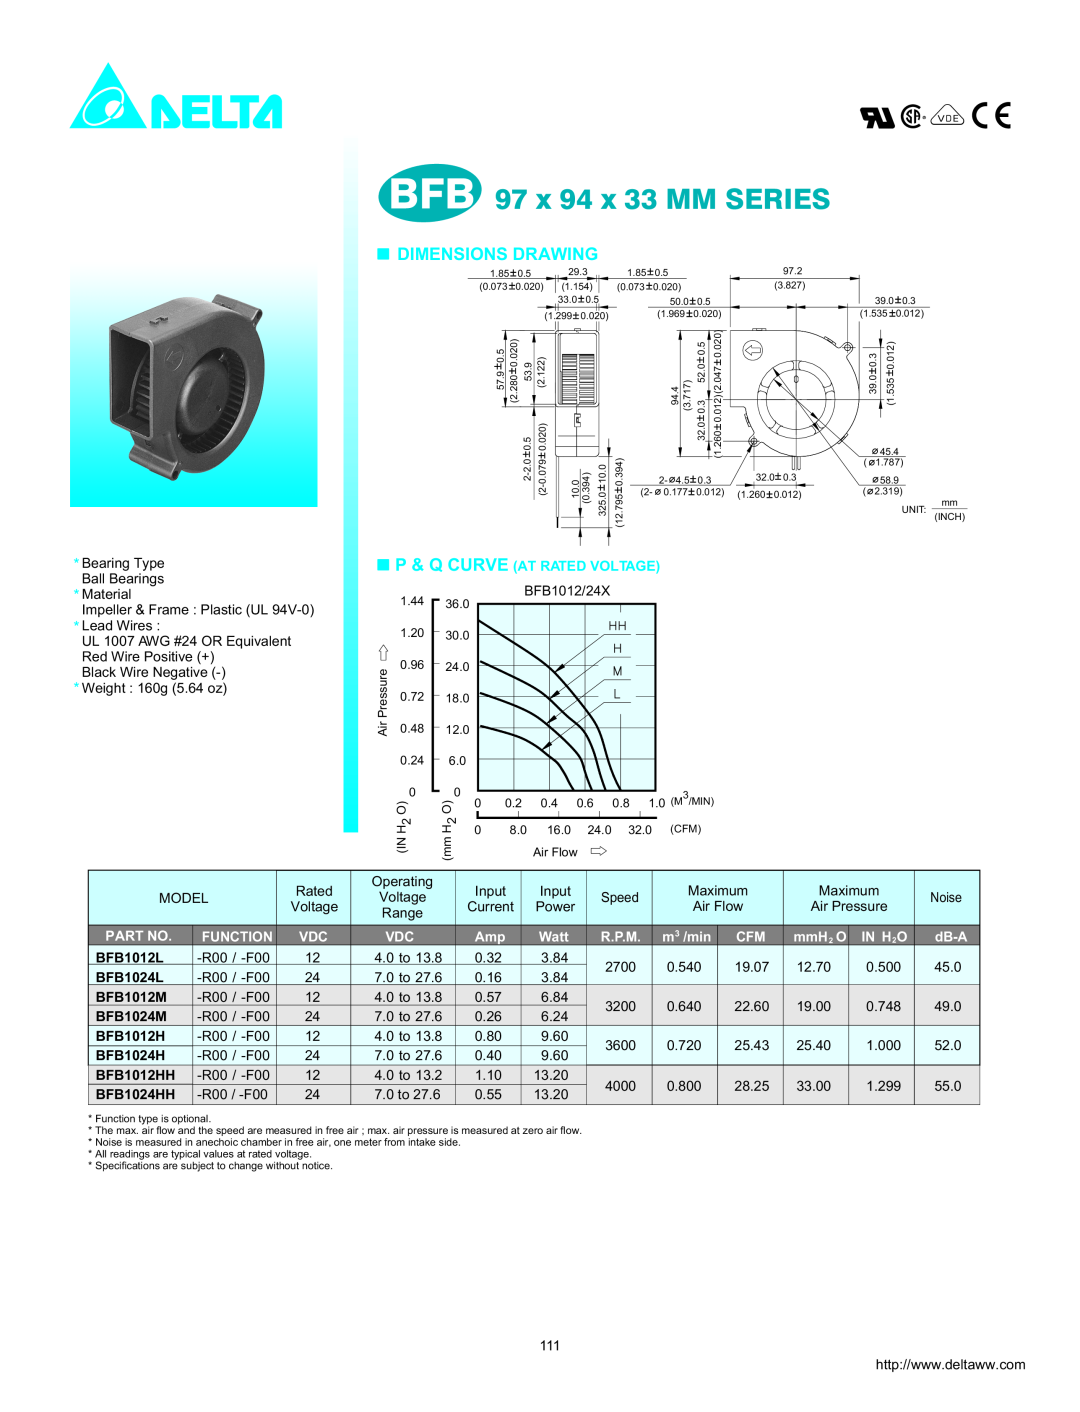 Delta Electronics BFB1024H dimensions BFB 97 x 94 x 33 MM SERIES, Dimensions Drawing, P & Q Curve At Rated Voltage, mmH2 O 